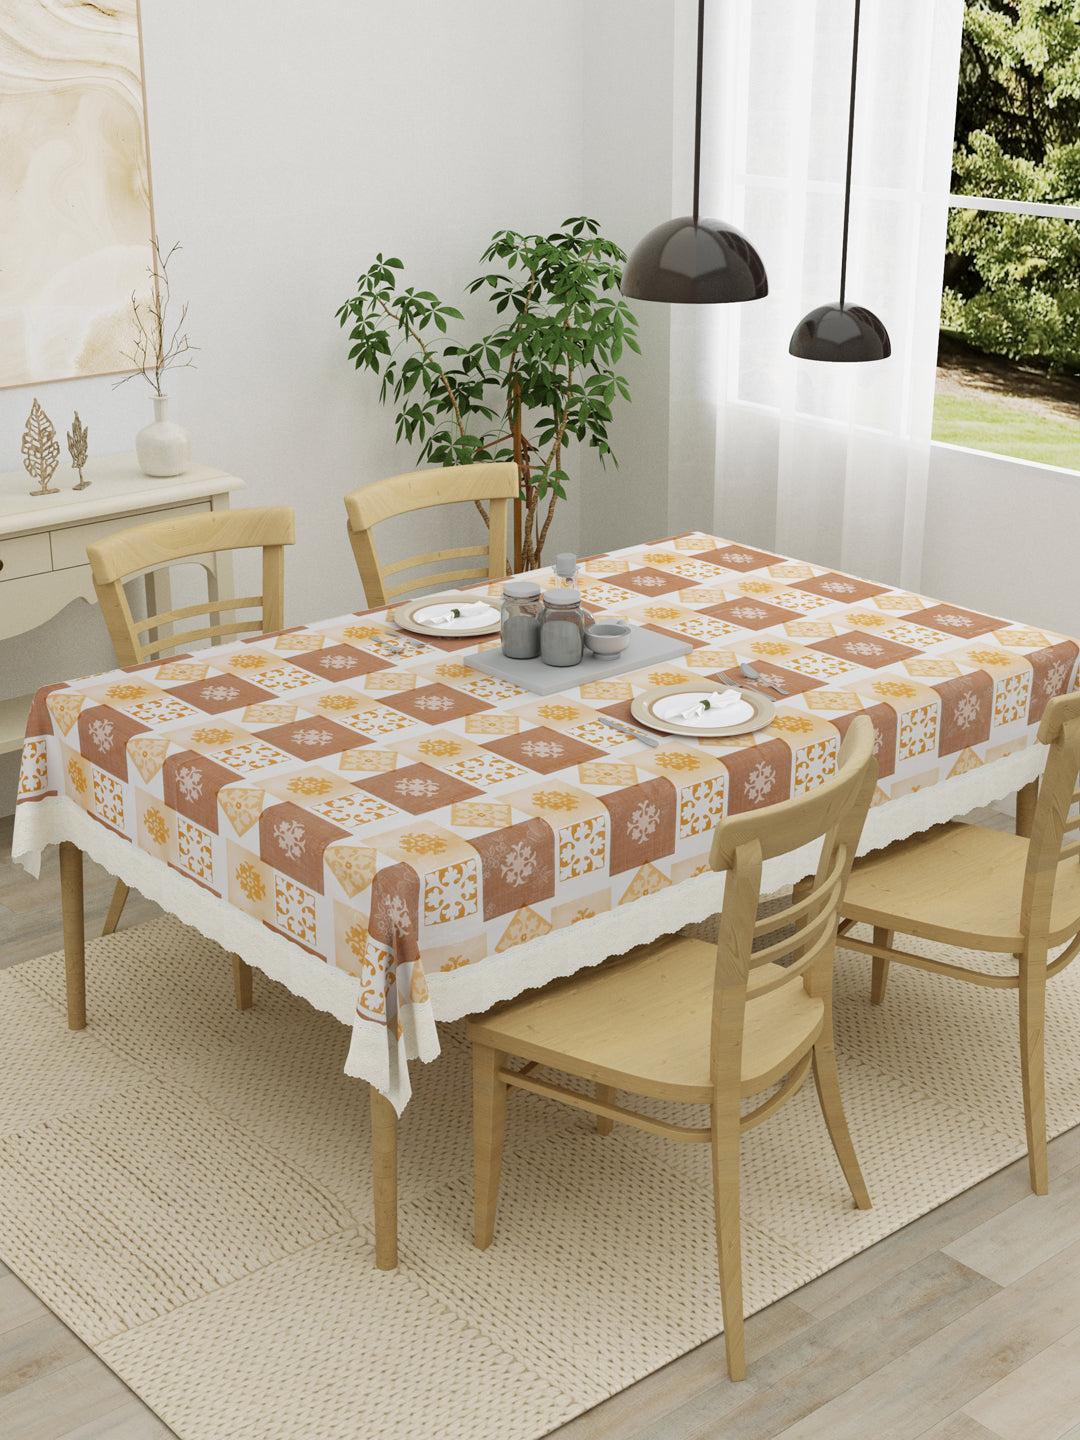 4 Seater Dining Table Cover; Material - PVC; Anti Slip; Brown & Yellow Checks